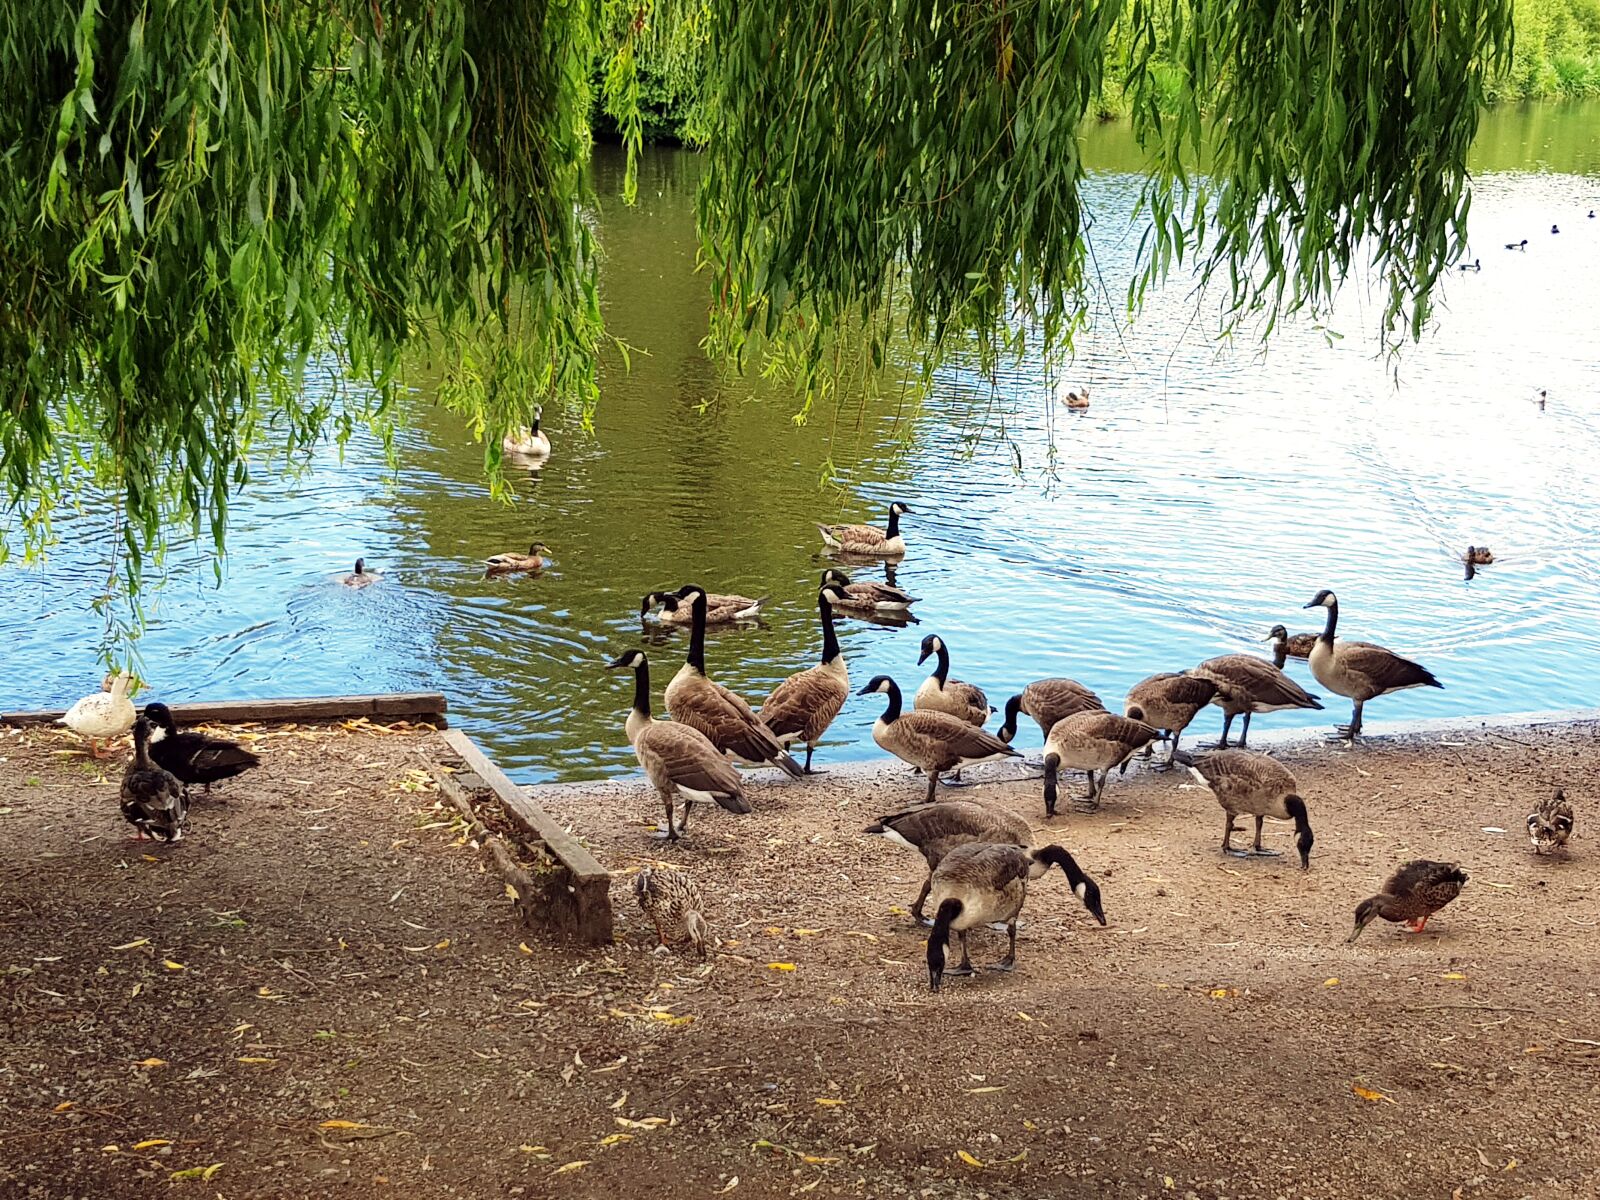 Samsung Galaxy S8 sample photo. Geese, pond, water photography